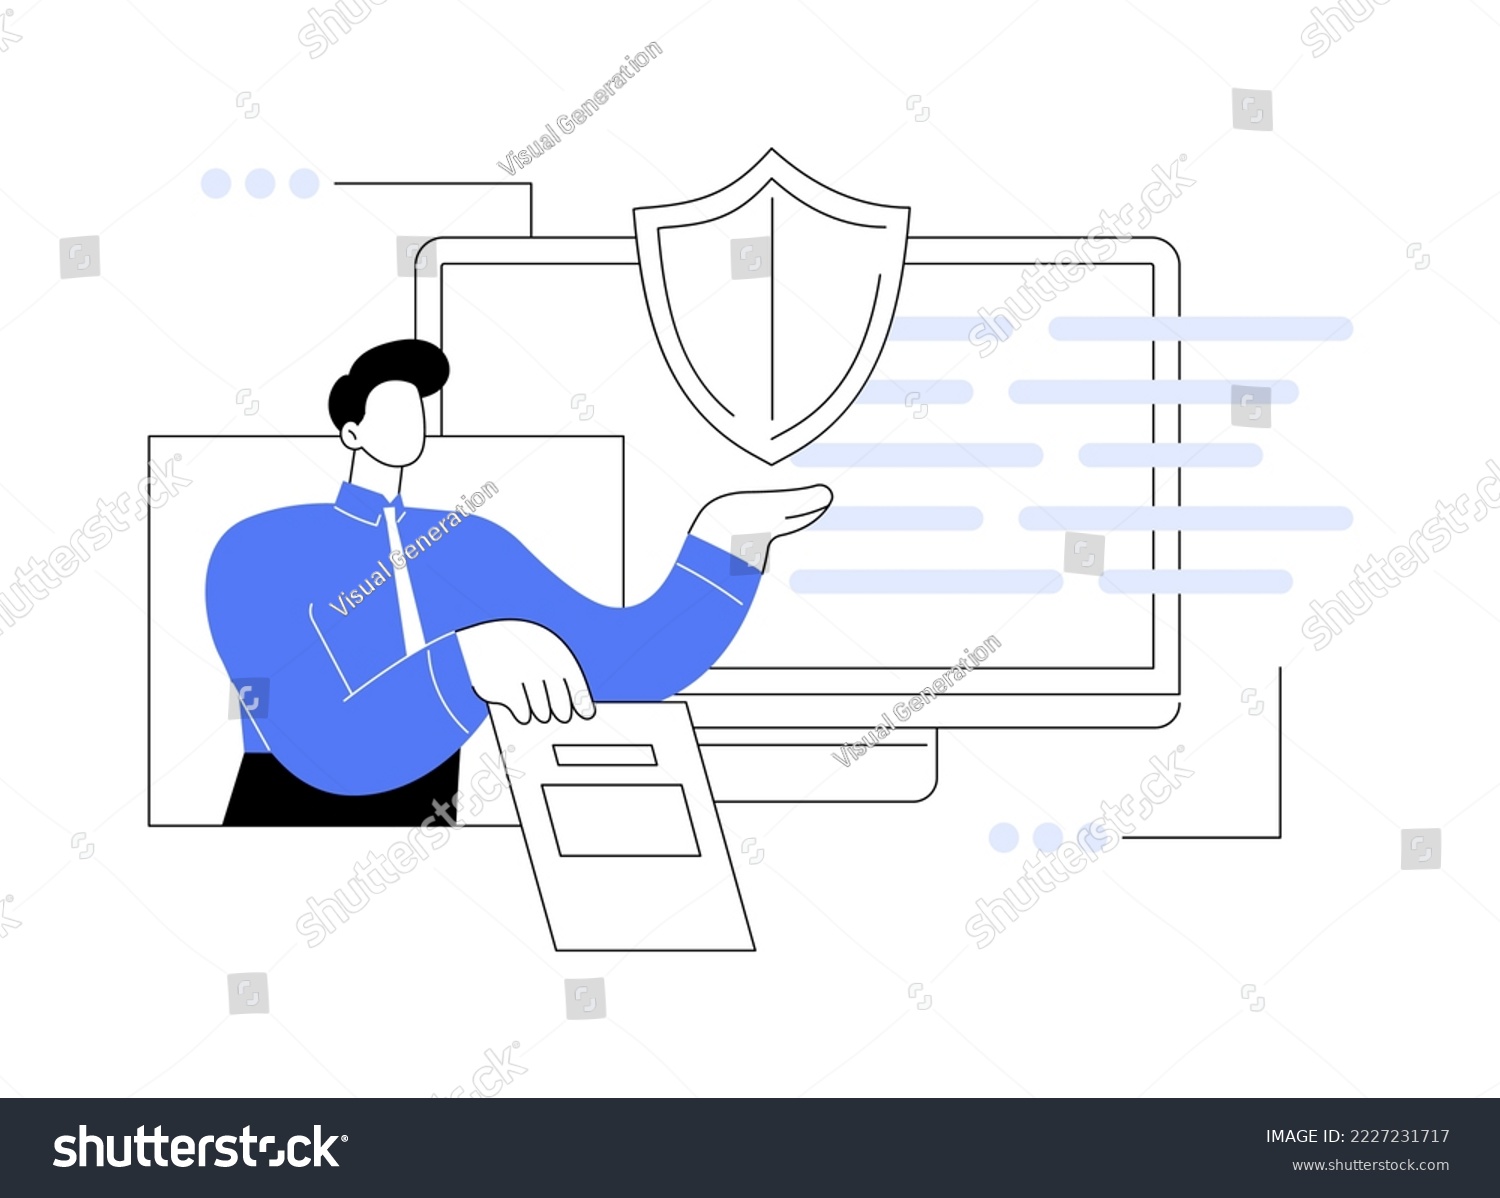 SVG of General data protection regulation abstract concept vector illustration. Personal information control and security, browser cookies permission, GDPR disclose data collection abstract metaphor. svg